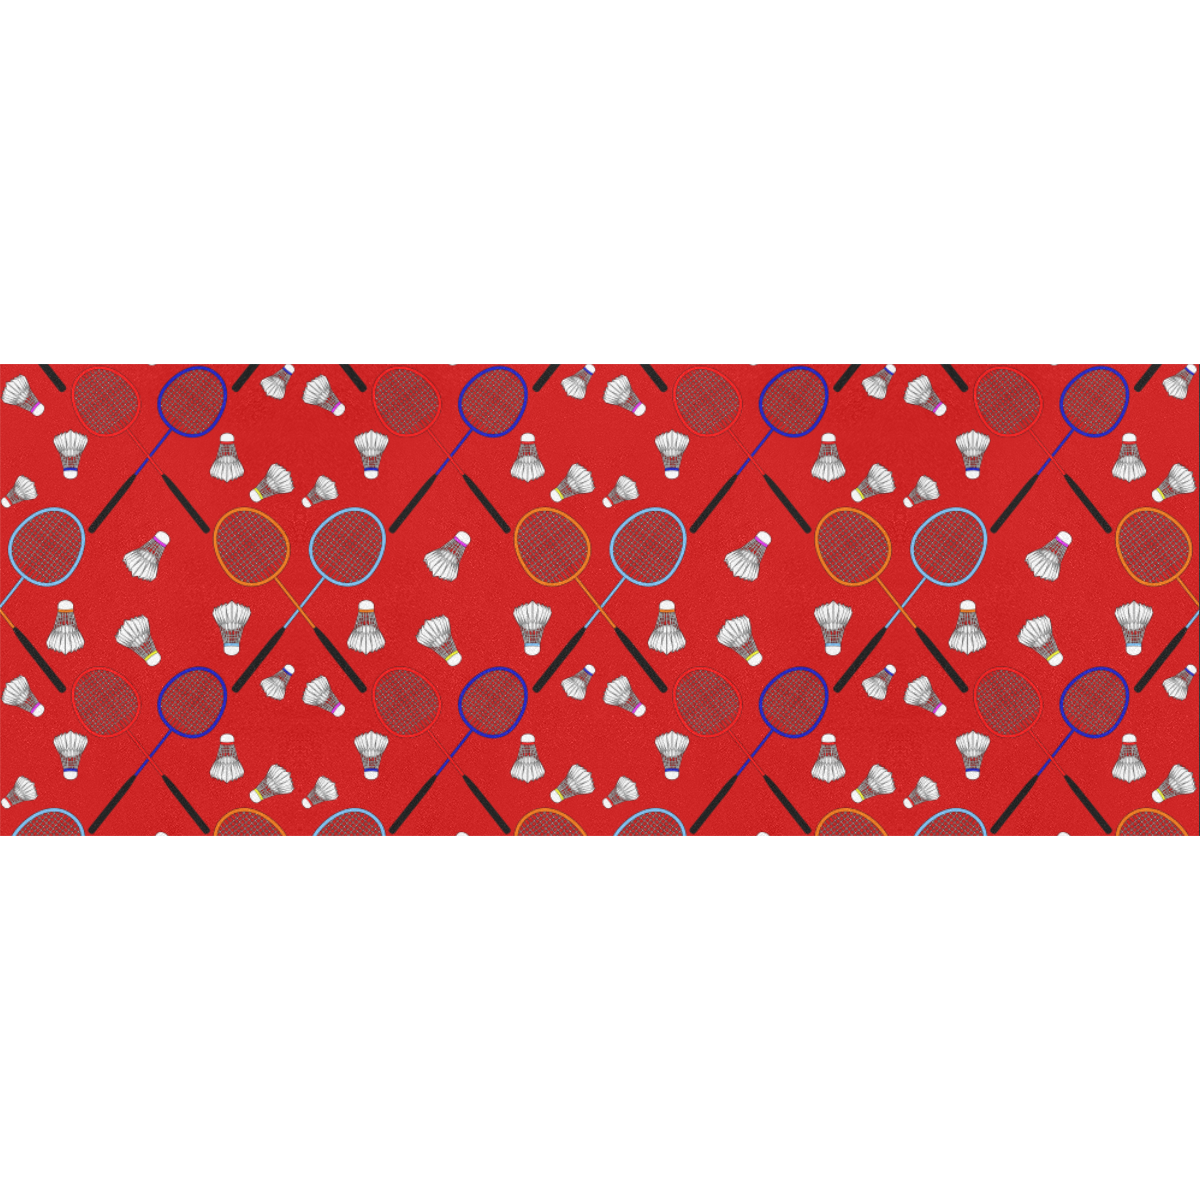 Badminton Rackets and Shuttlecocks Pattern Sports Red Gift Wrapping Paper 58"x 23" (3 Rolls)